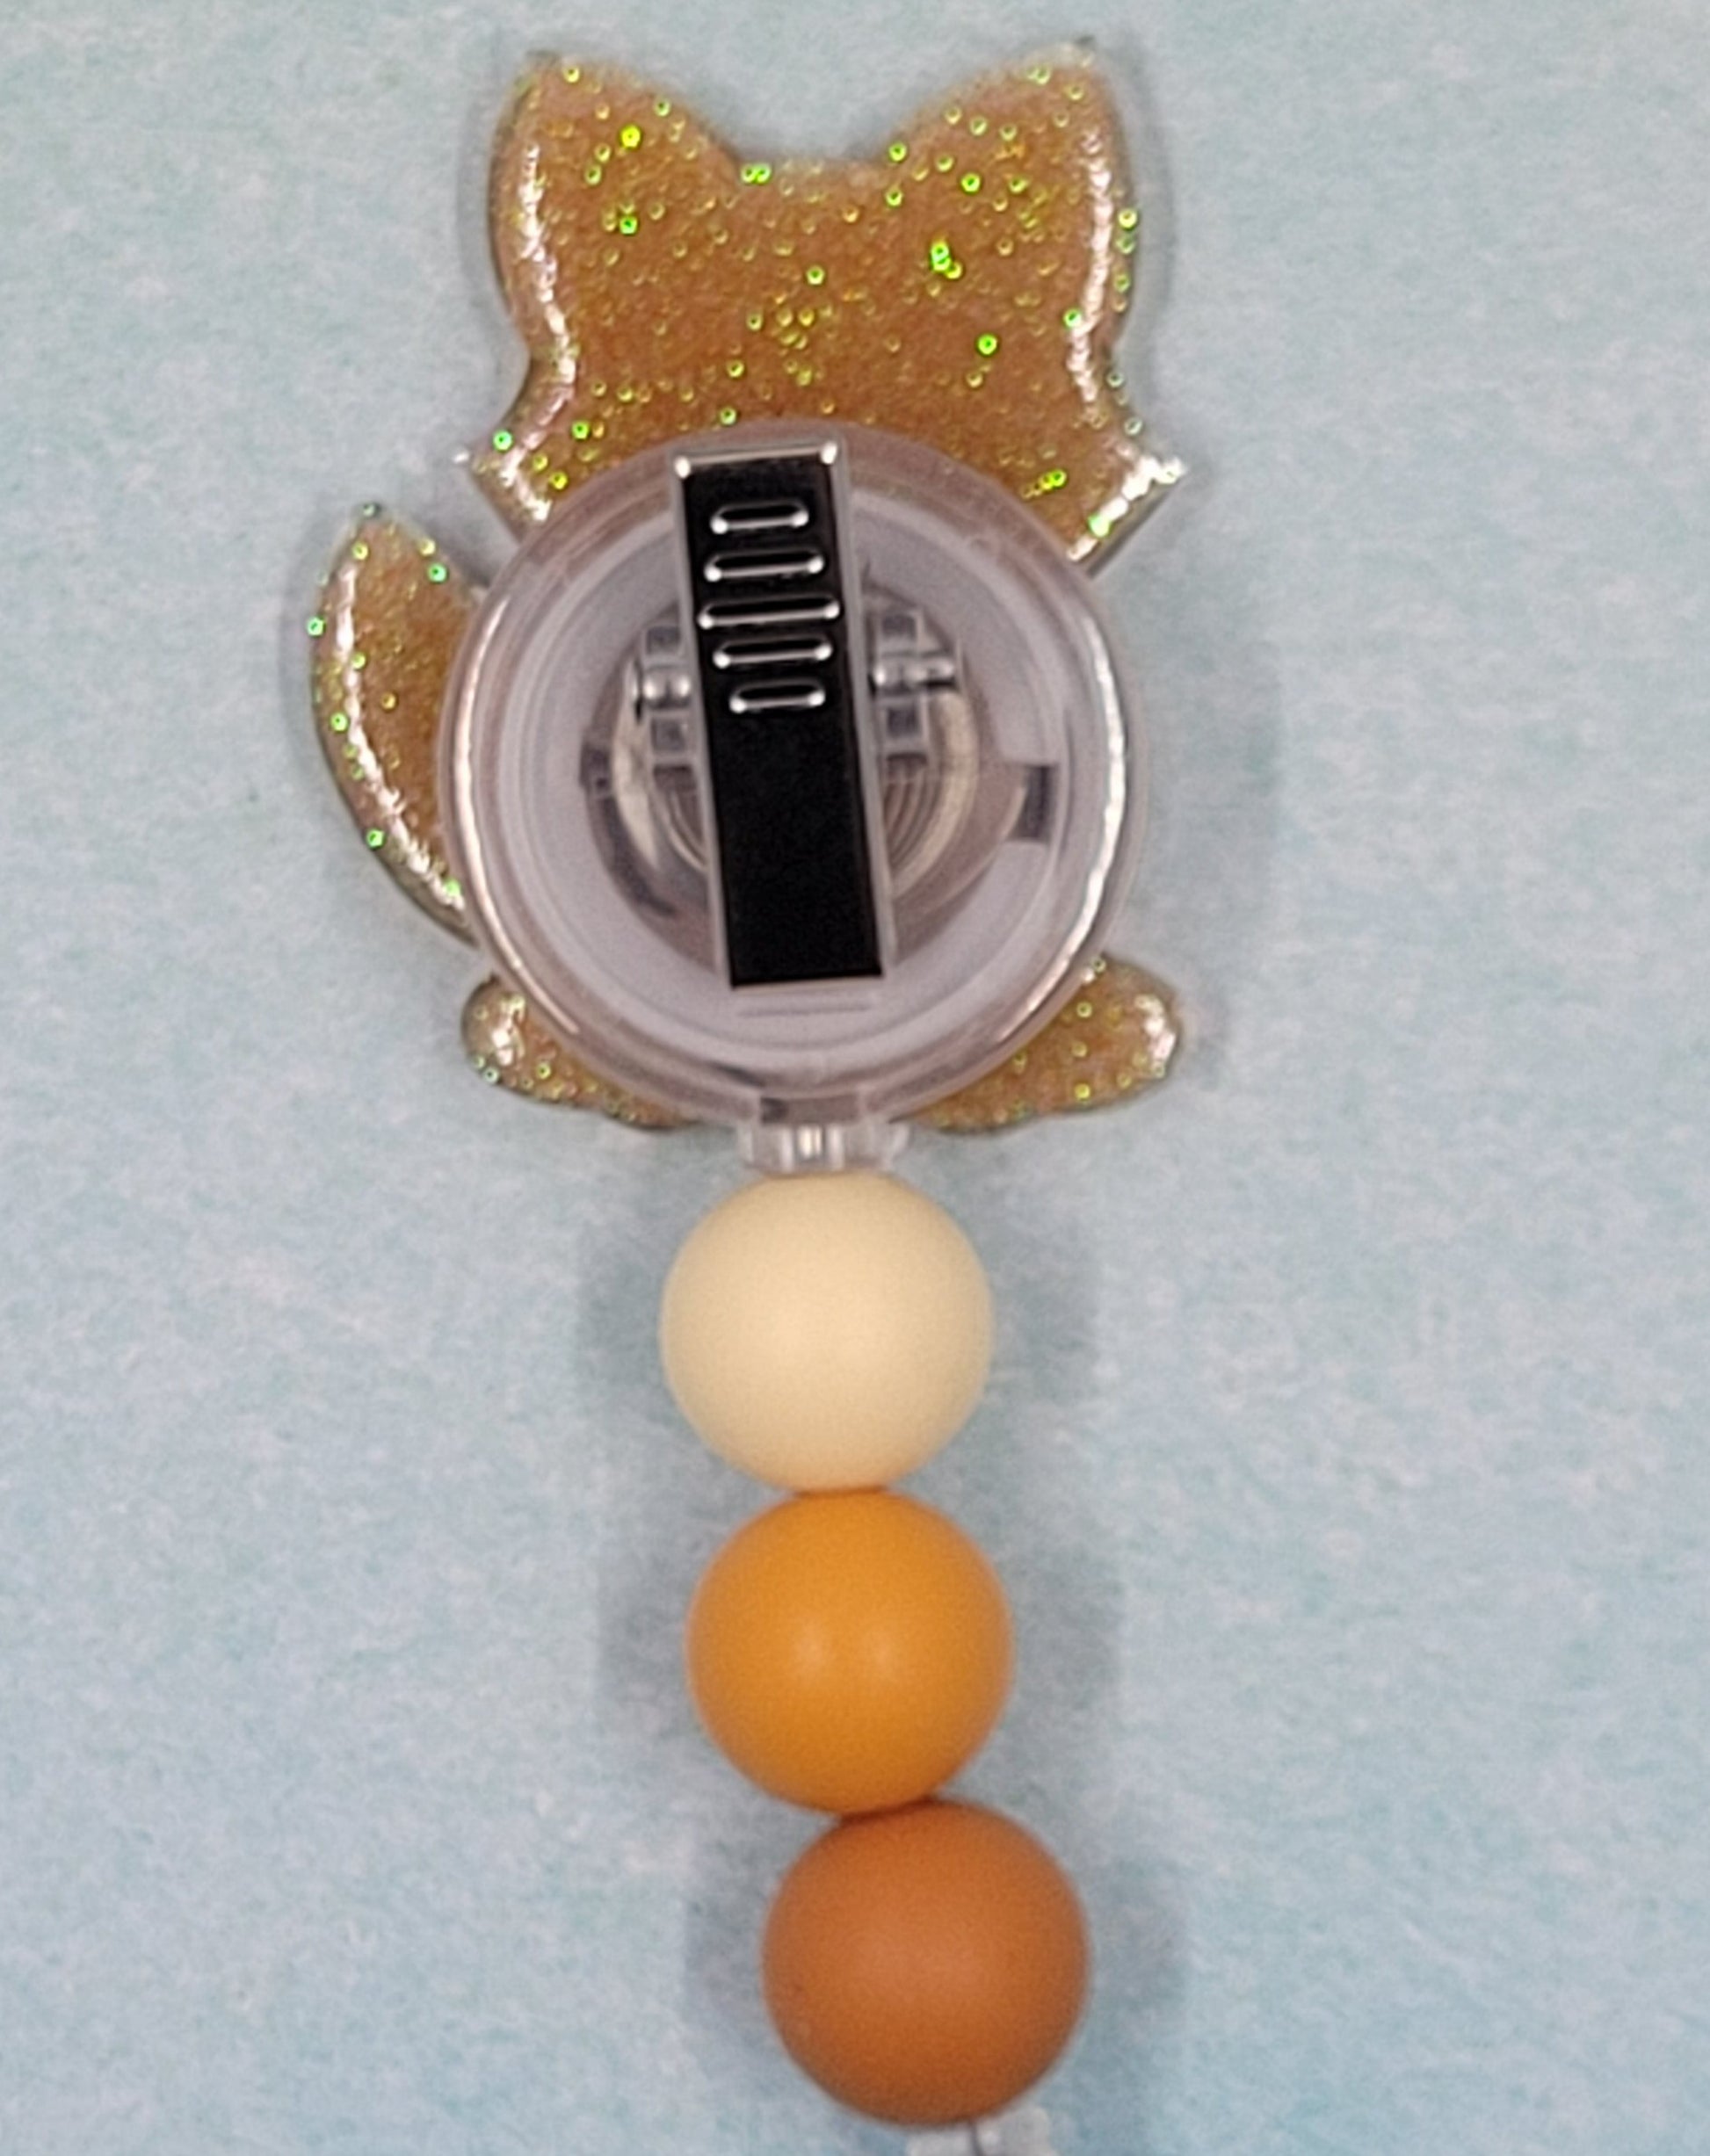 This Badge Reel features a delightful fox design paired with a shiny gold glitter background. The adorable fox is complemented by three color-coordinated silicone beads for an extra touch of charm. Sure to be a hit with any animal lover.